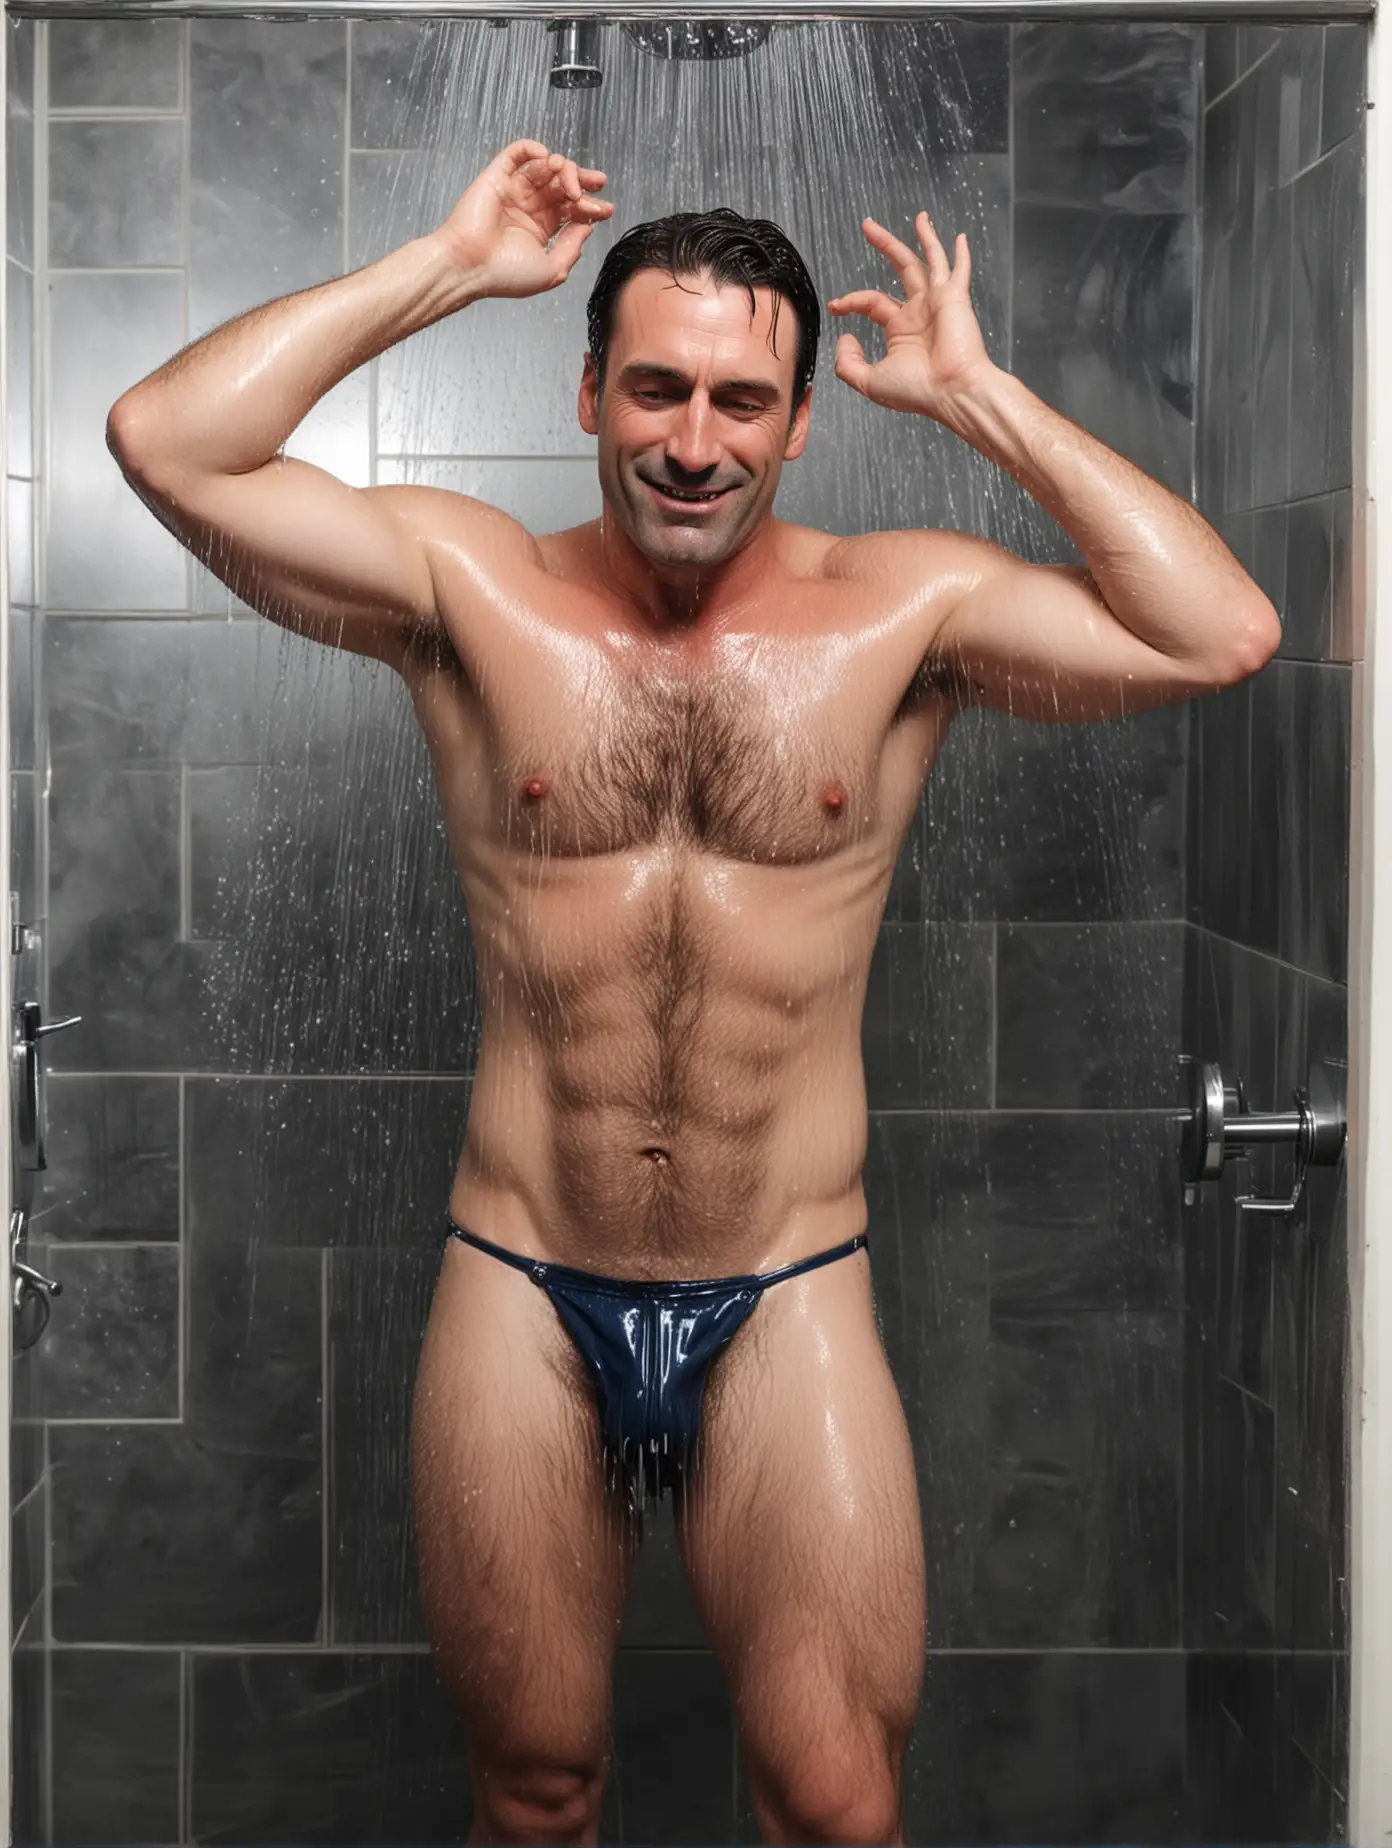 A hairy guy who looks a lot like Jon Hamm taking a hot shower in his black-tiled shower. Viewed from outside a partly fogged glass shower door. He's wearing a white Speedo with vertical dark blue lines, with arms raised and eyes closed.